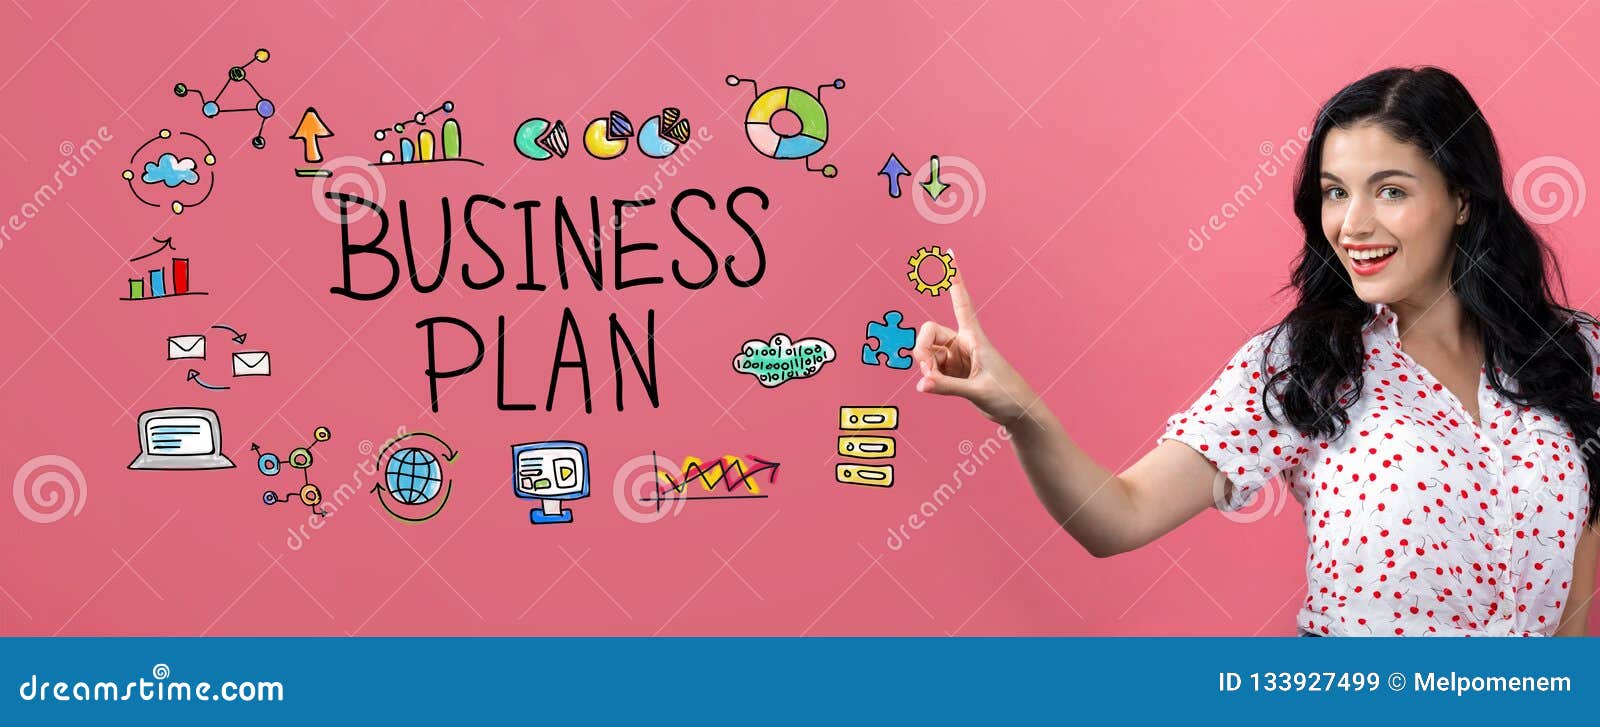 business plans for ladies